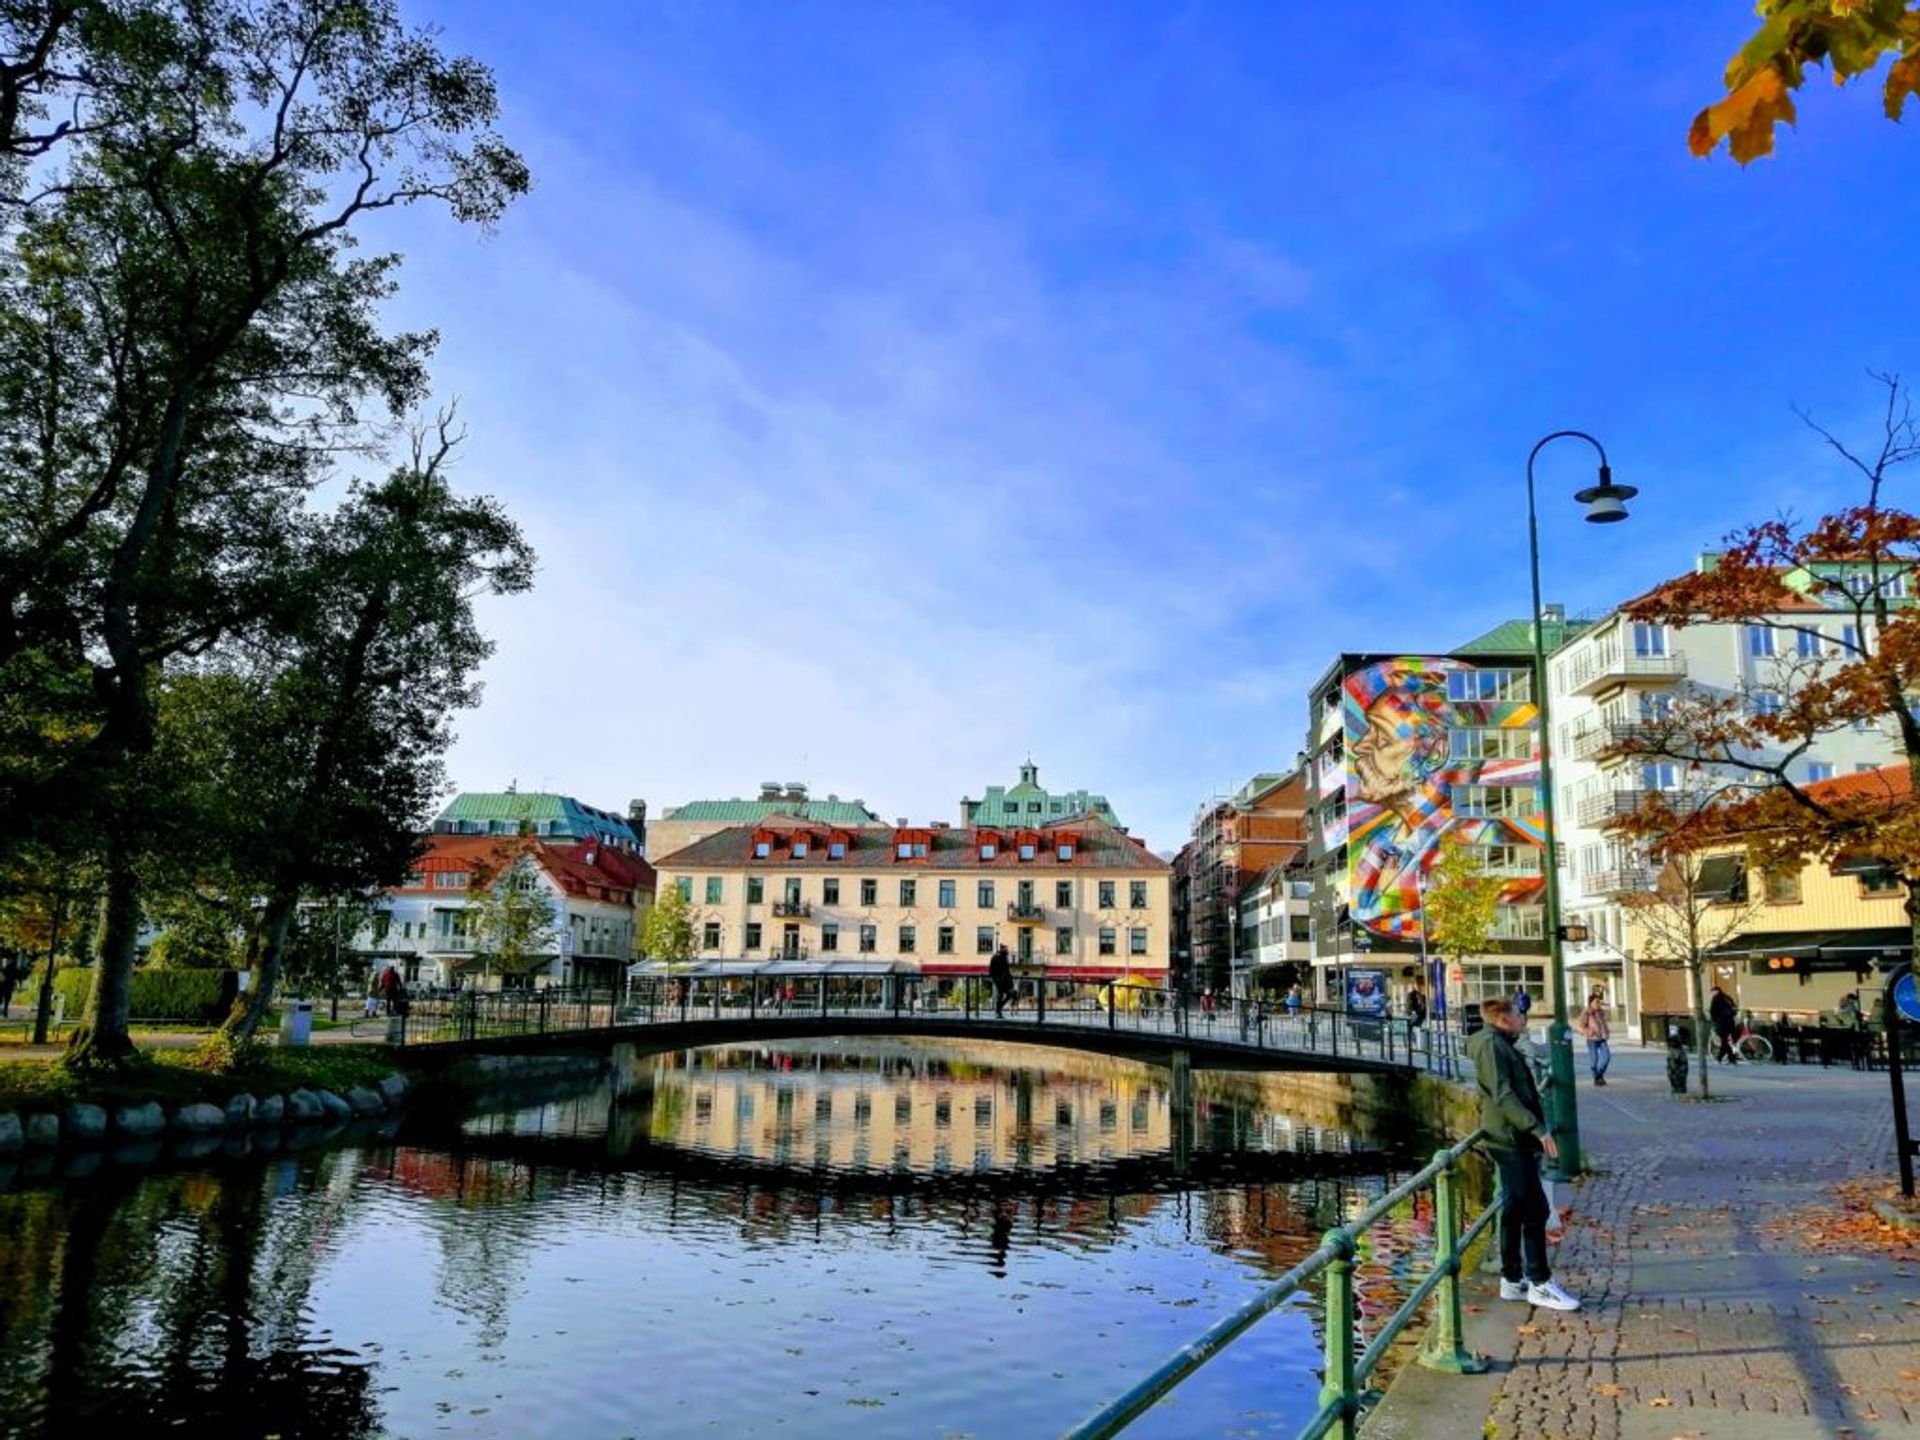 Colourful buildings beside a river.